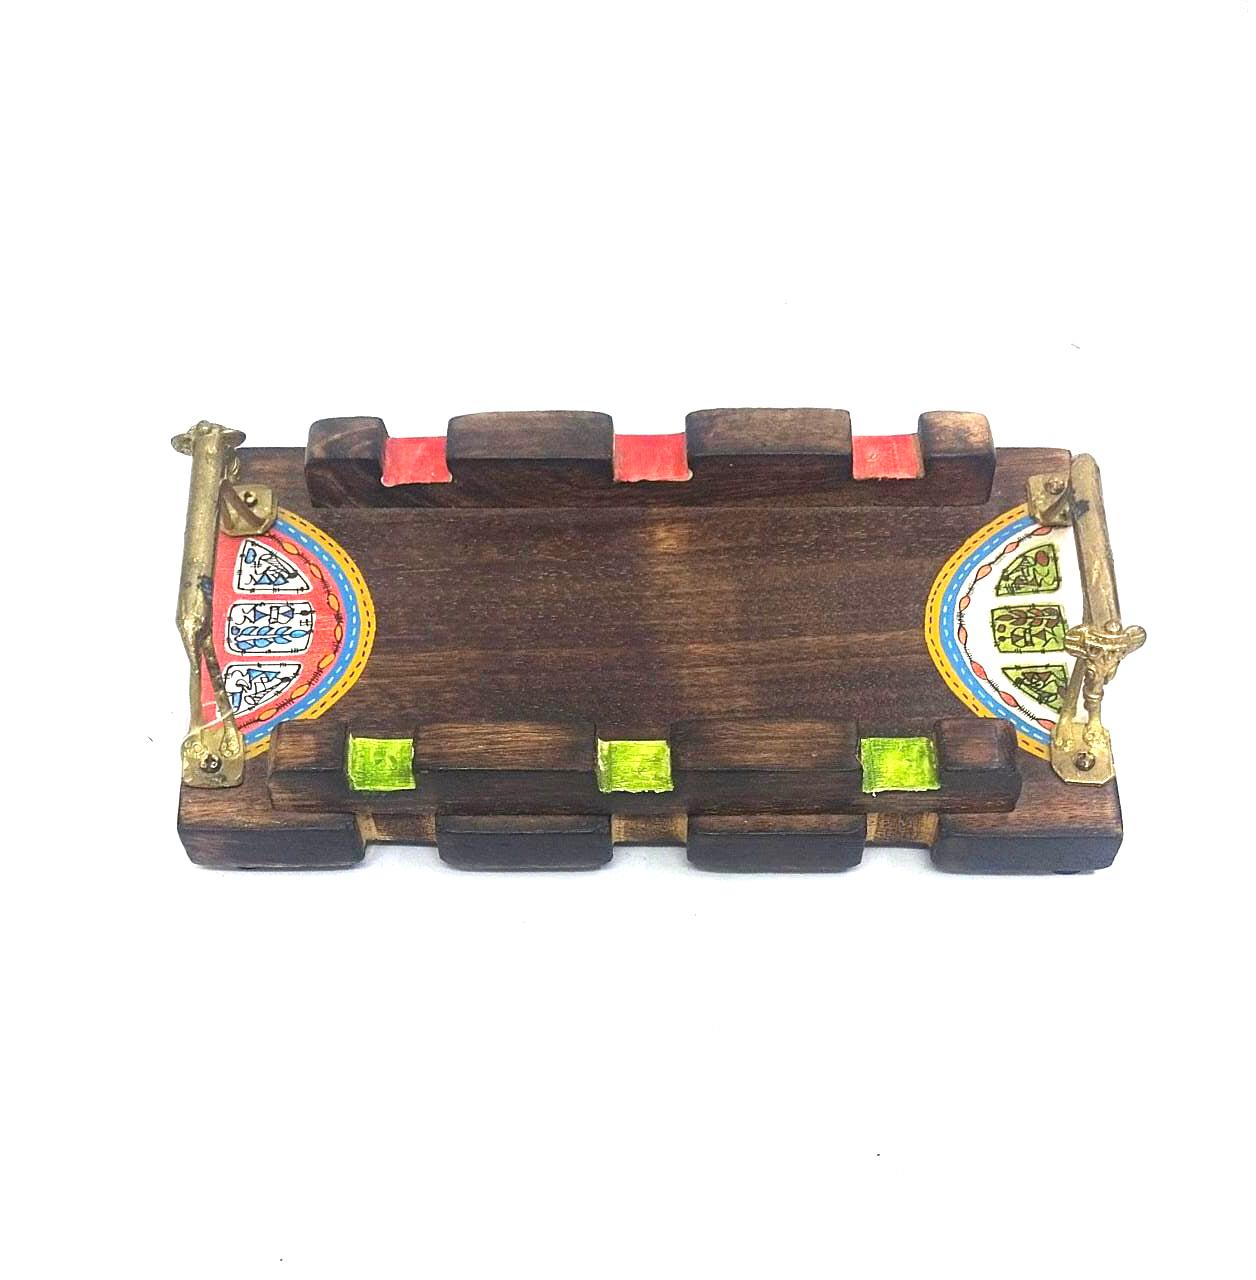 Exclusive Artistic Wooden Tray With Brass Animal Handles Hand Crafted Tamrapatra